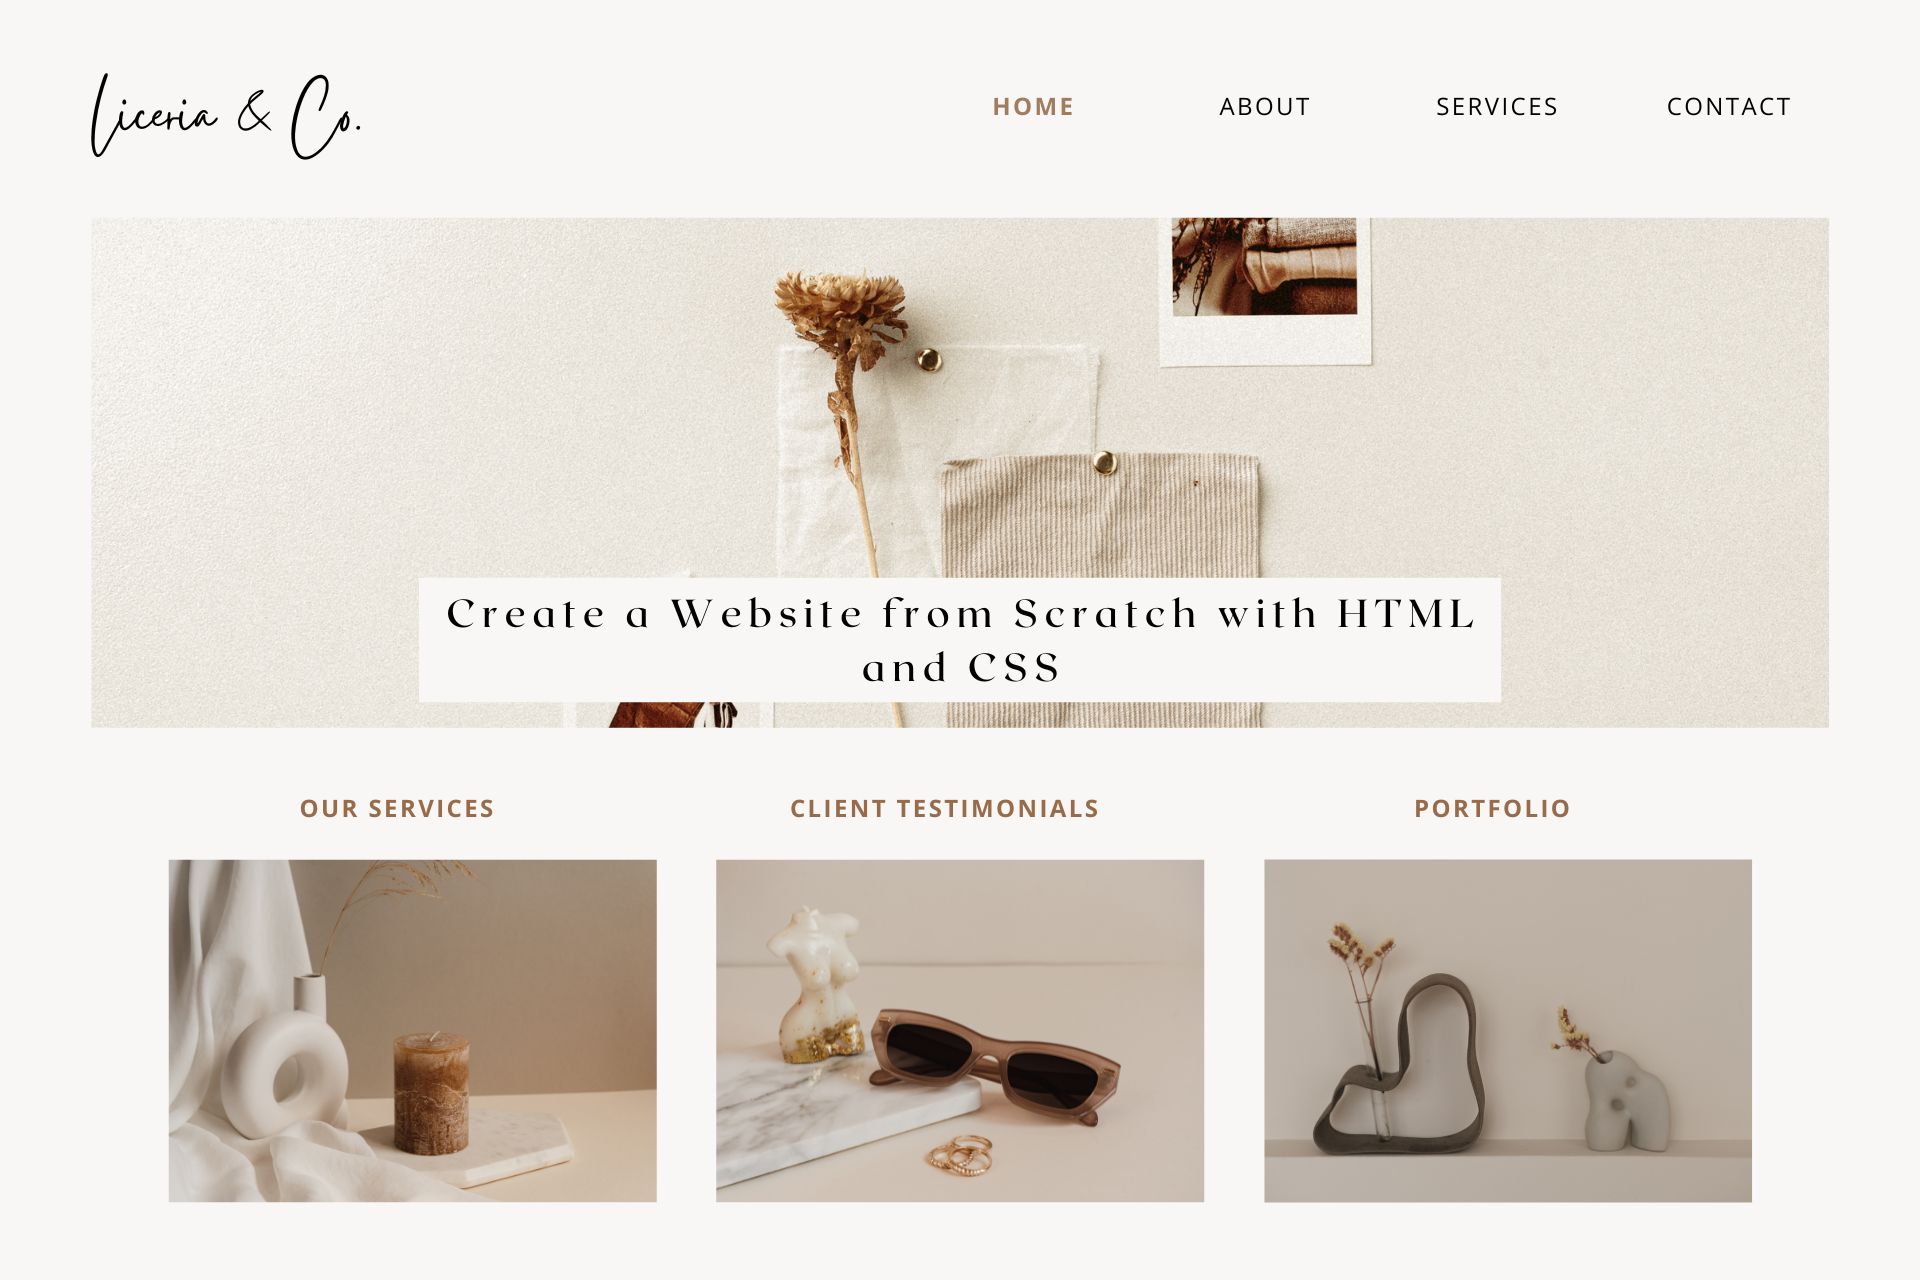 A Step-by-Step Guide: How to Create a Website from Scratch with HTML and CSS